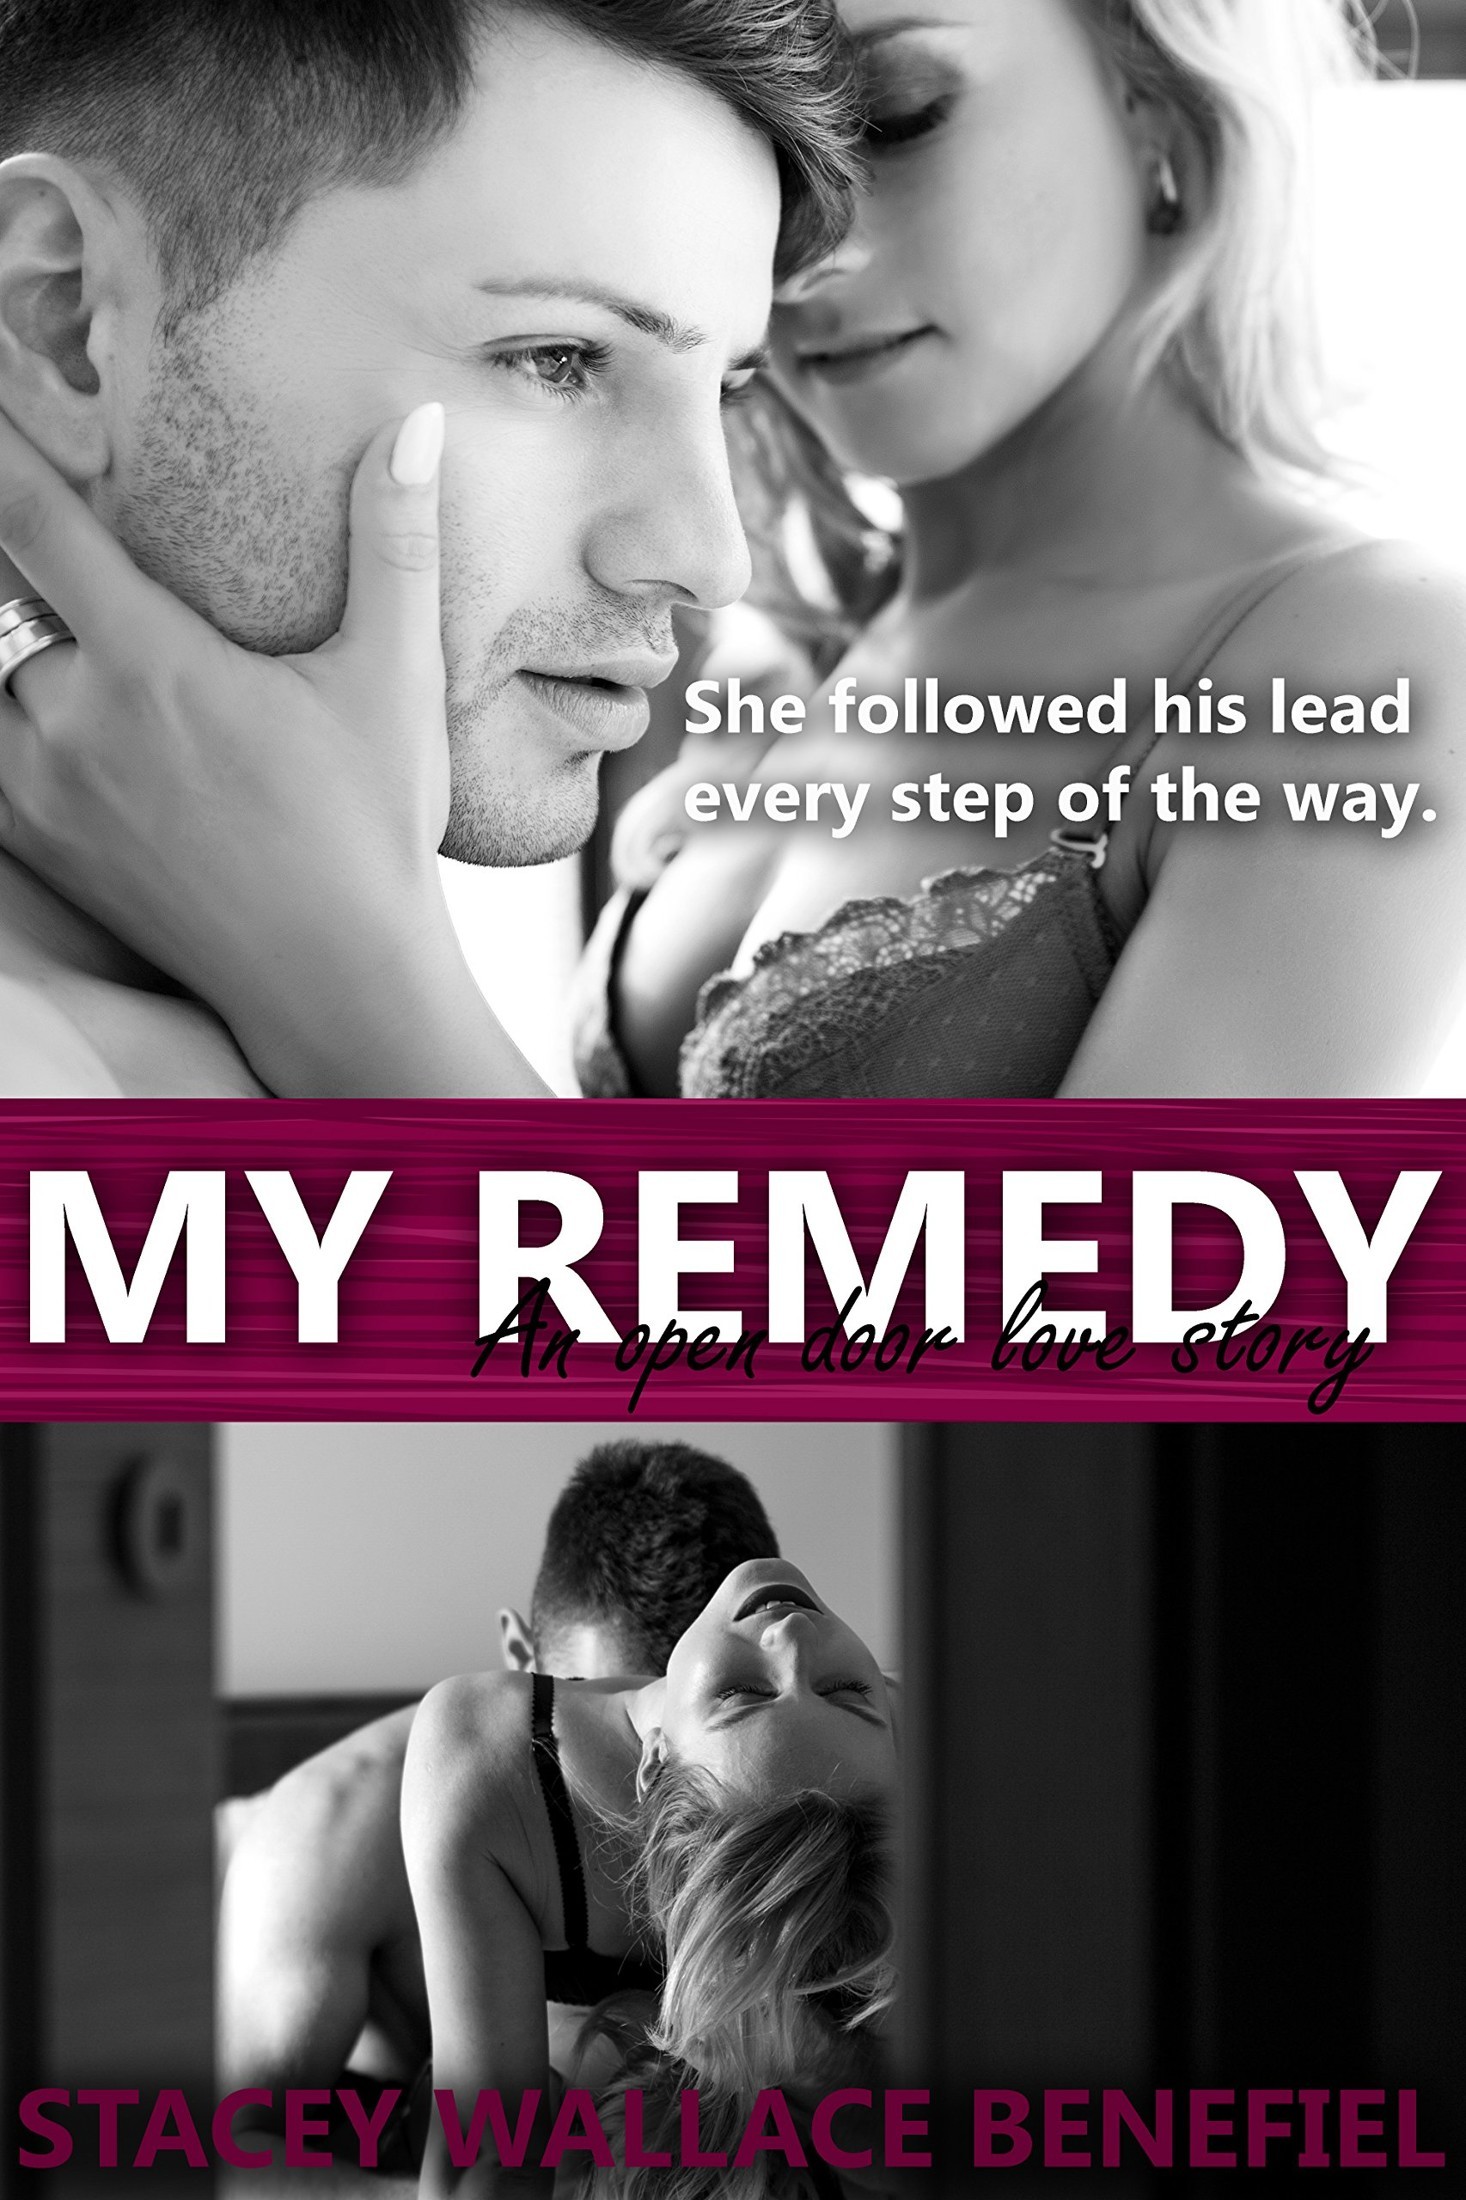 My Remedy (Open Door Love Story Book 3) by Stacey Wallace Benefiel